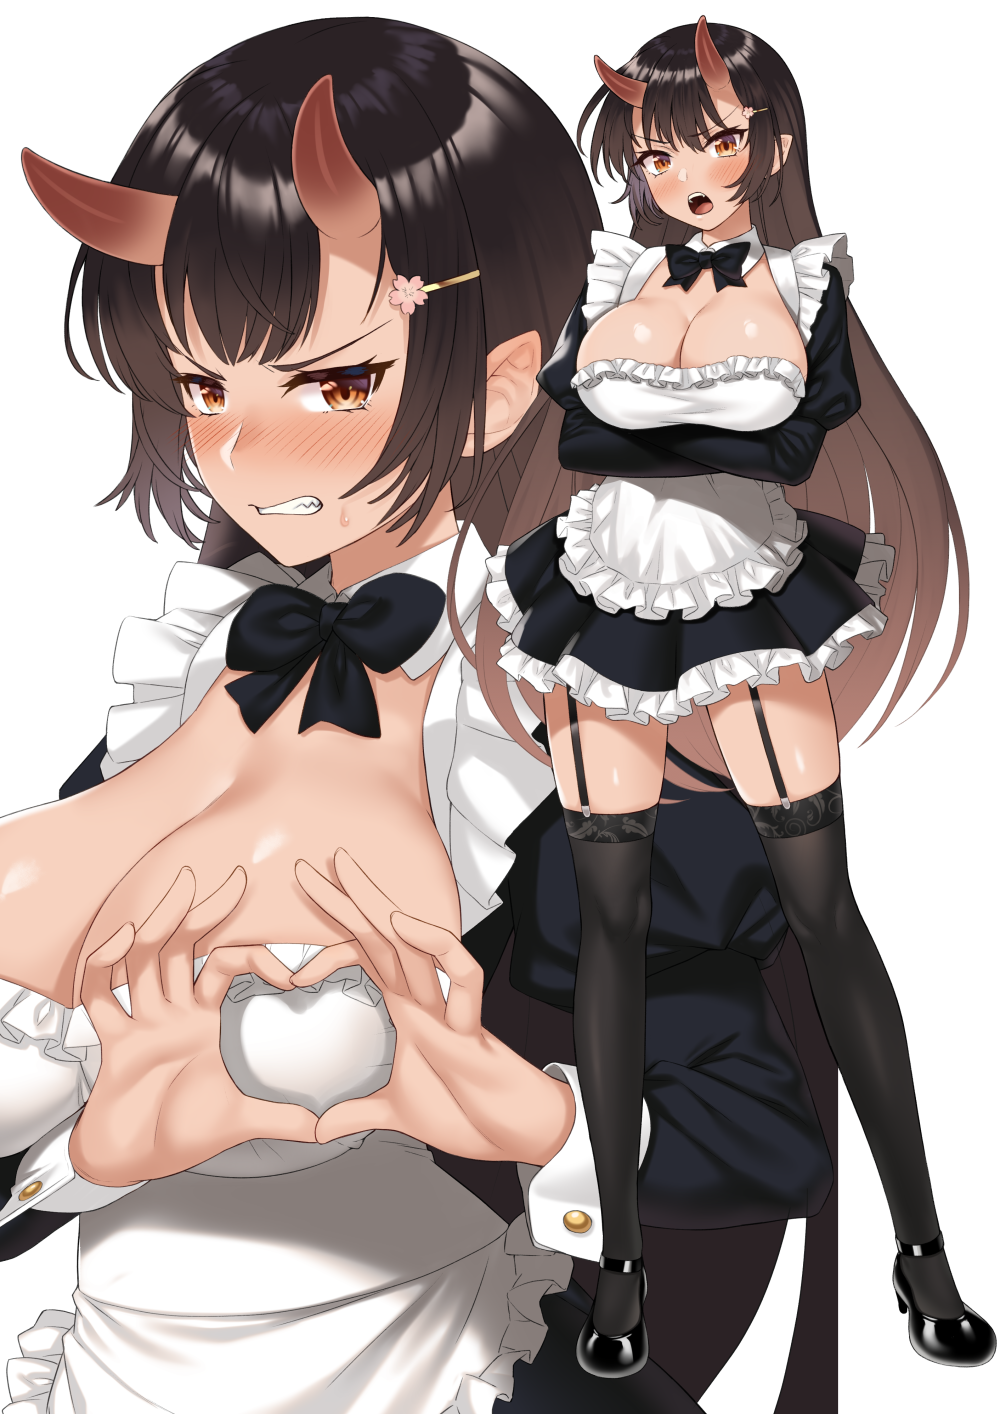 Anime 1000x1414 anime anime girls digital art artwork portrait display Takunomi maid outfit thigh-highs heart hands cleavage horns oni girl brunette brown eyes blushing boob heart fantasy girl stockings black stockings garter belt boobs simple background white background looking at viewer